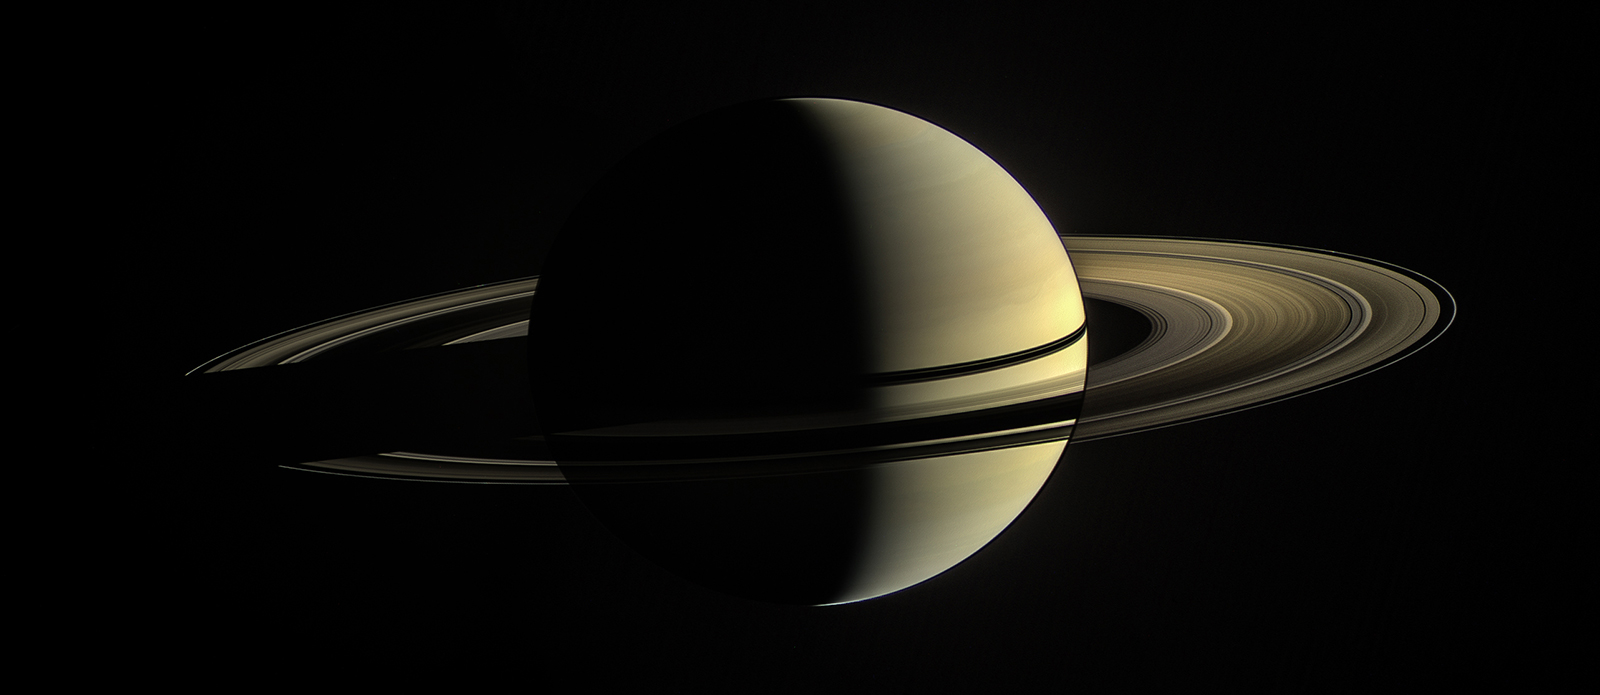 A photograph of Saturn from the Cassini spacecraft, with the left side dark and the right side brightened to reveal ring features. 